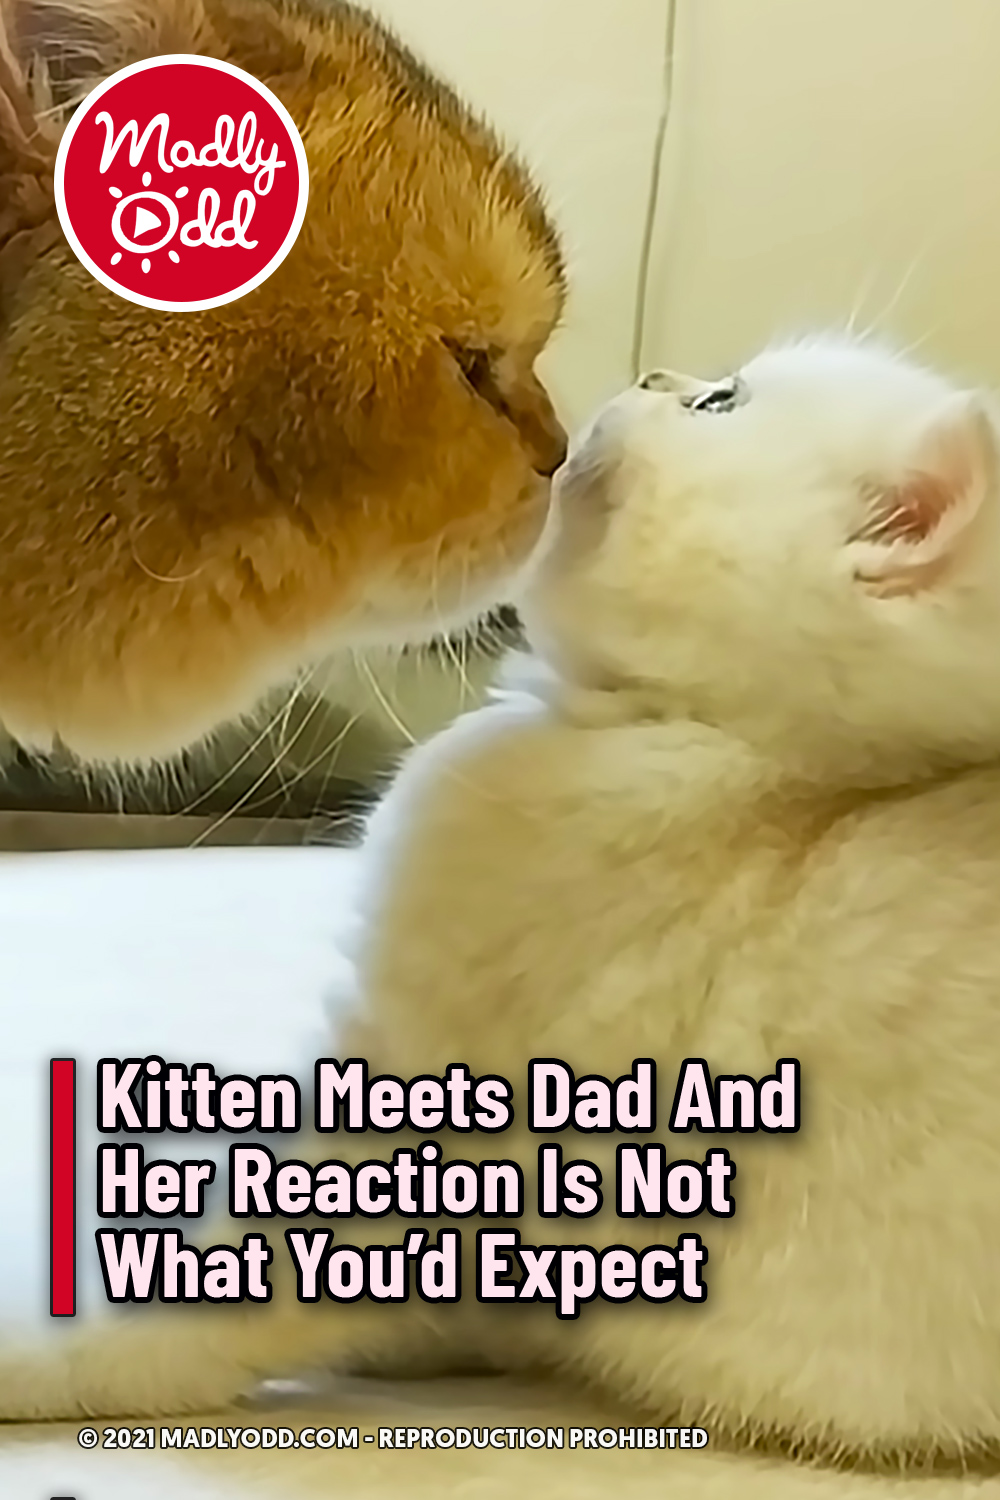 Kitten Meets Dad And Her Reaction Is Not What You’d Expect